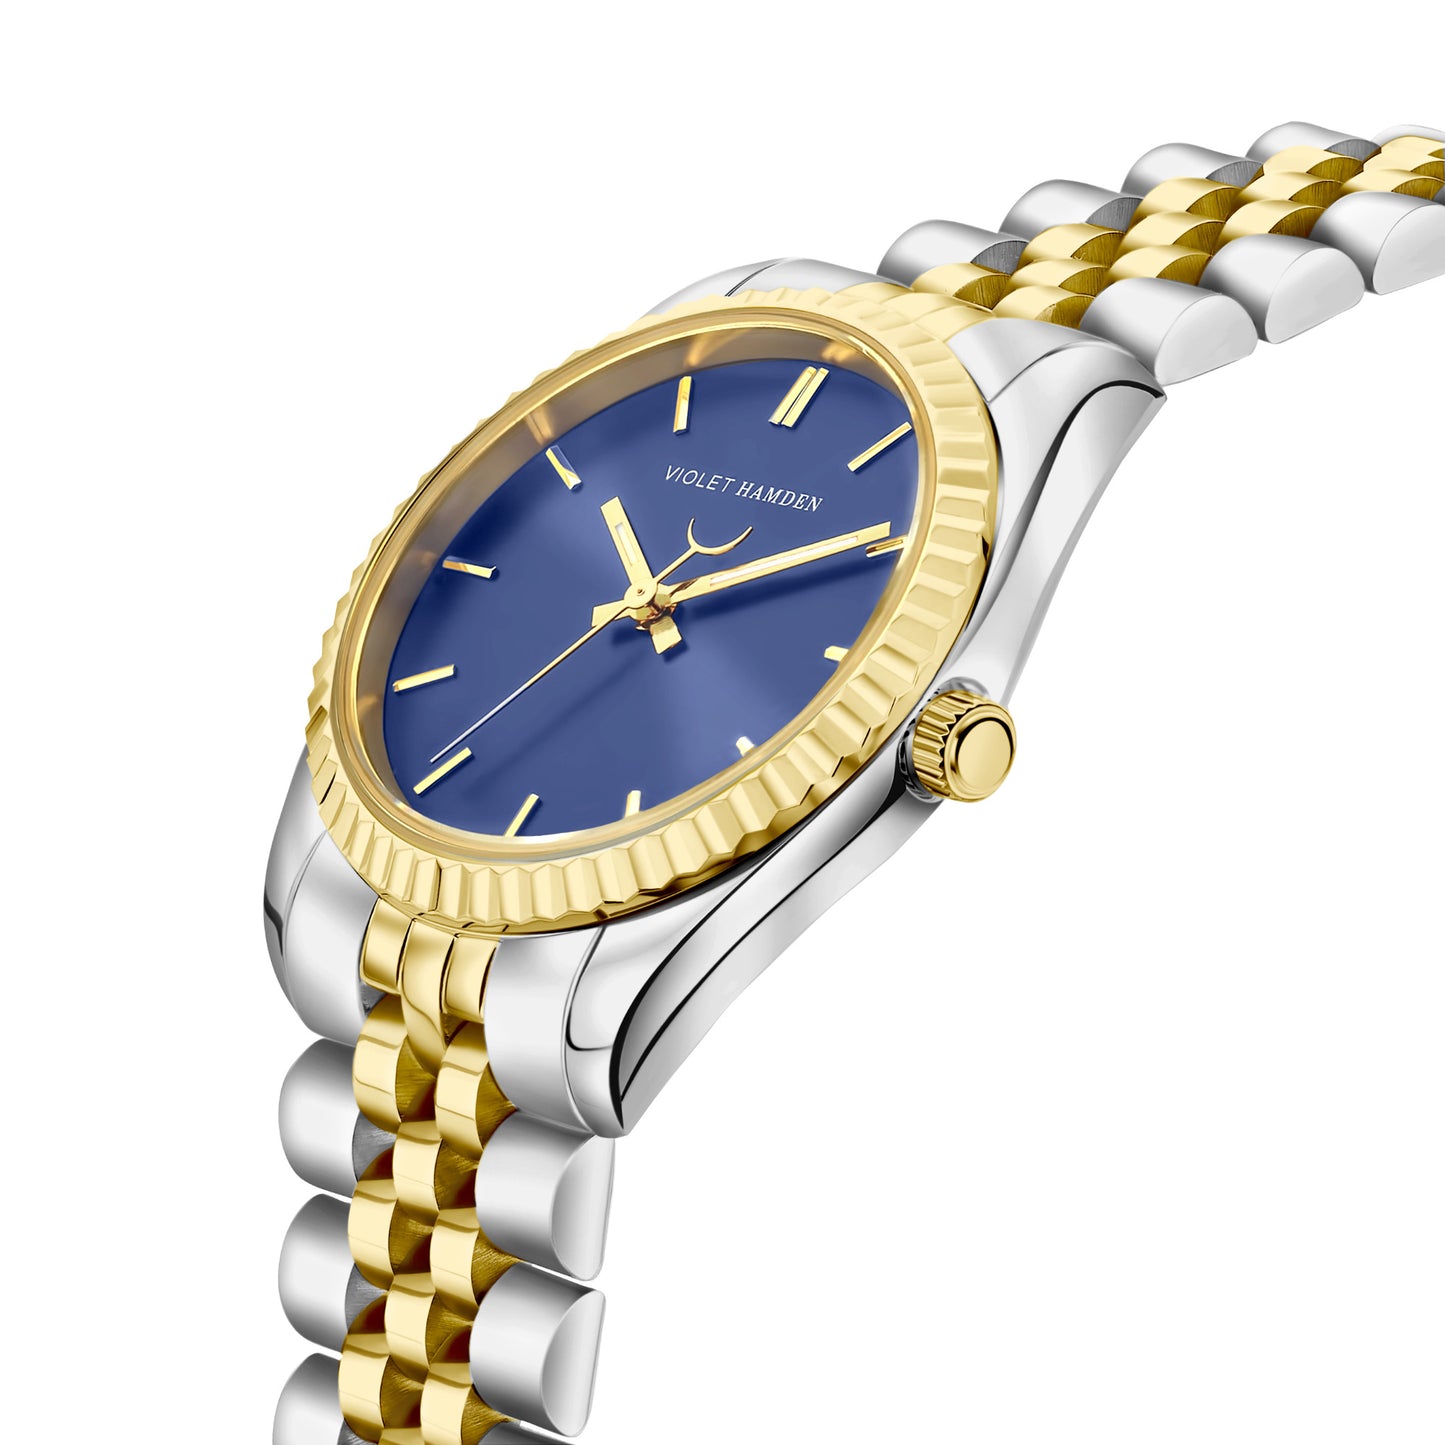 Sunrise round ladies watch gold and silver coloured and blue